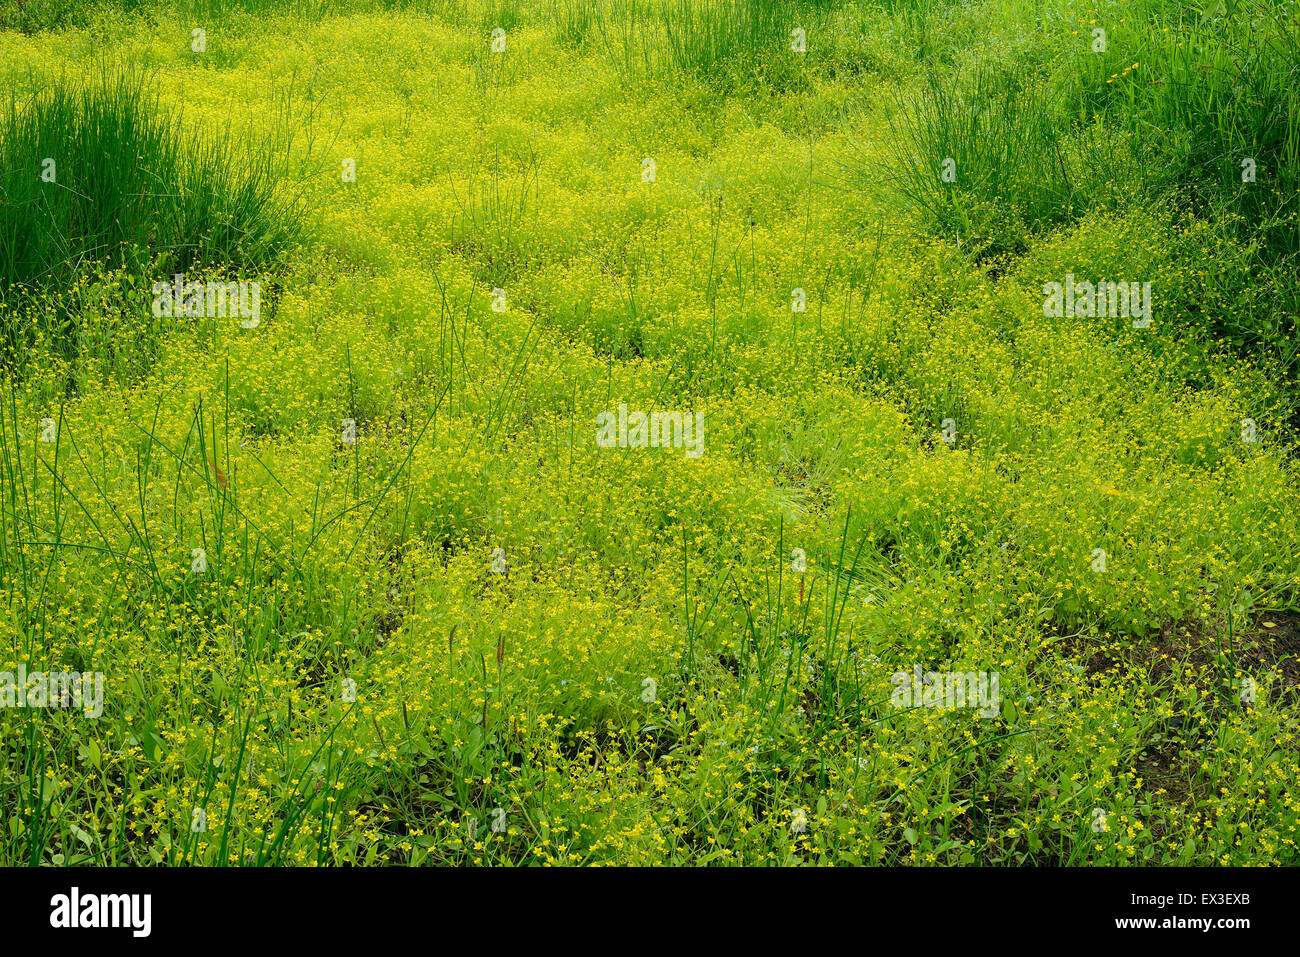 Adderstongue Spearwort - Ranunculus ophioglossifolius Known locally as the Badgeworth Buttercup Mass of flowers in pond Stock Photo